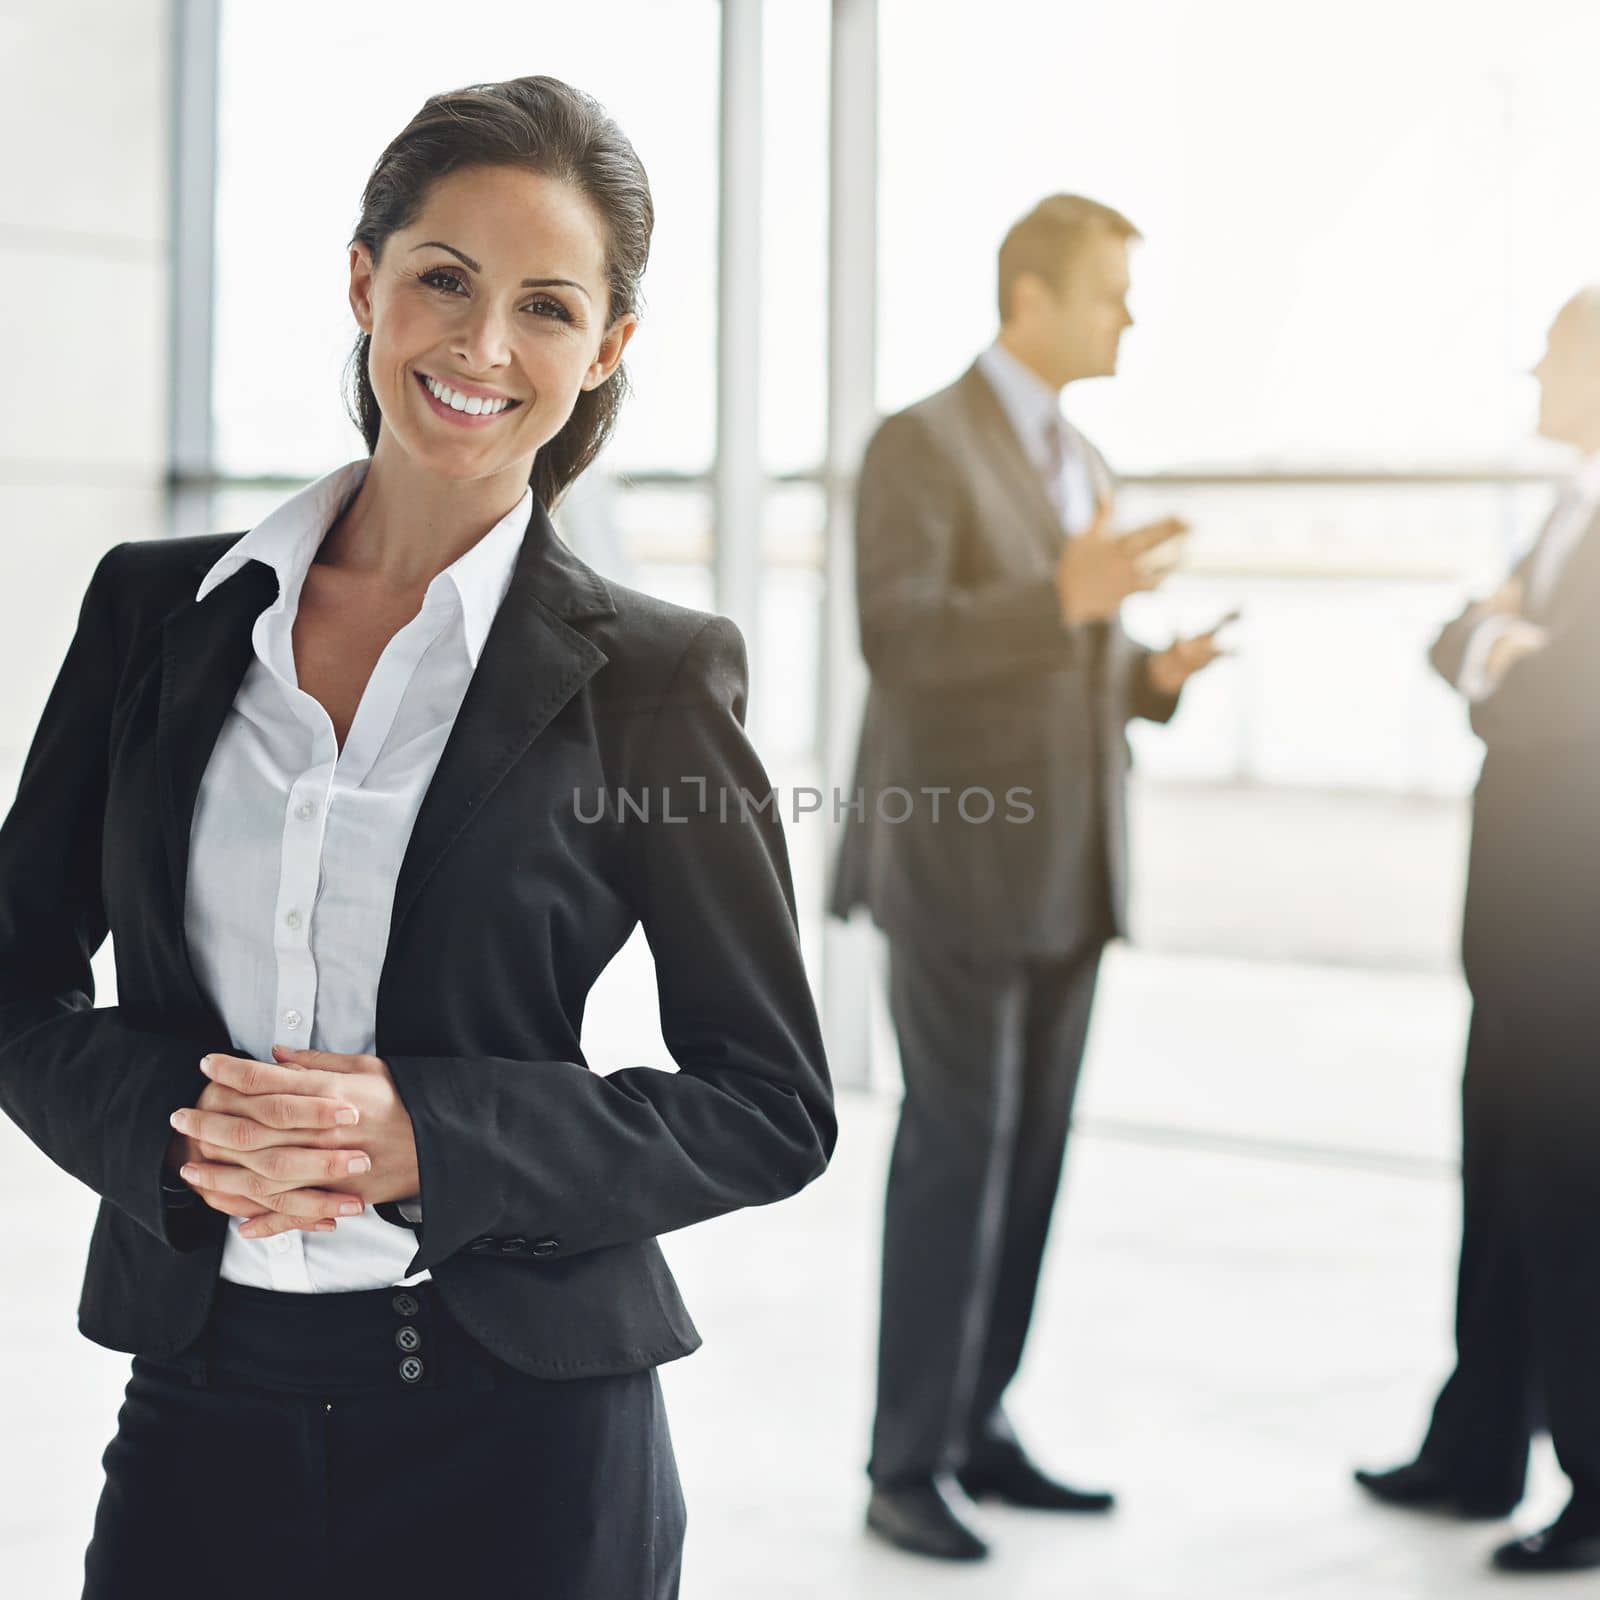 Shes the consumate professional. Cropped portrait of a businesswoman standing a lobby with her colleagues in the background